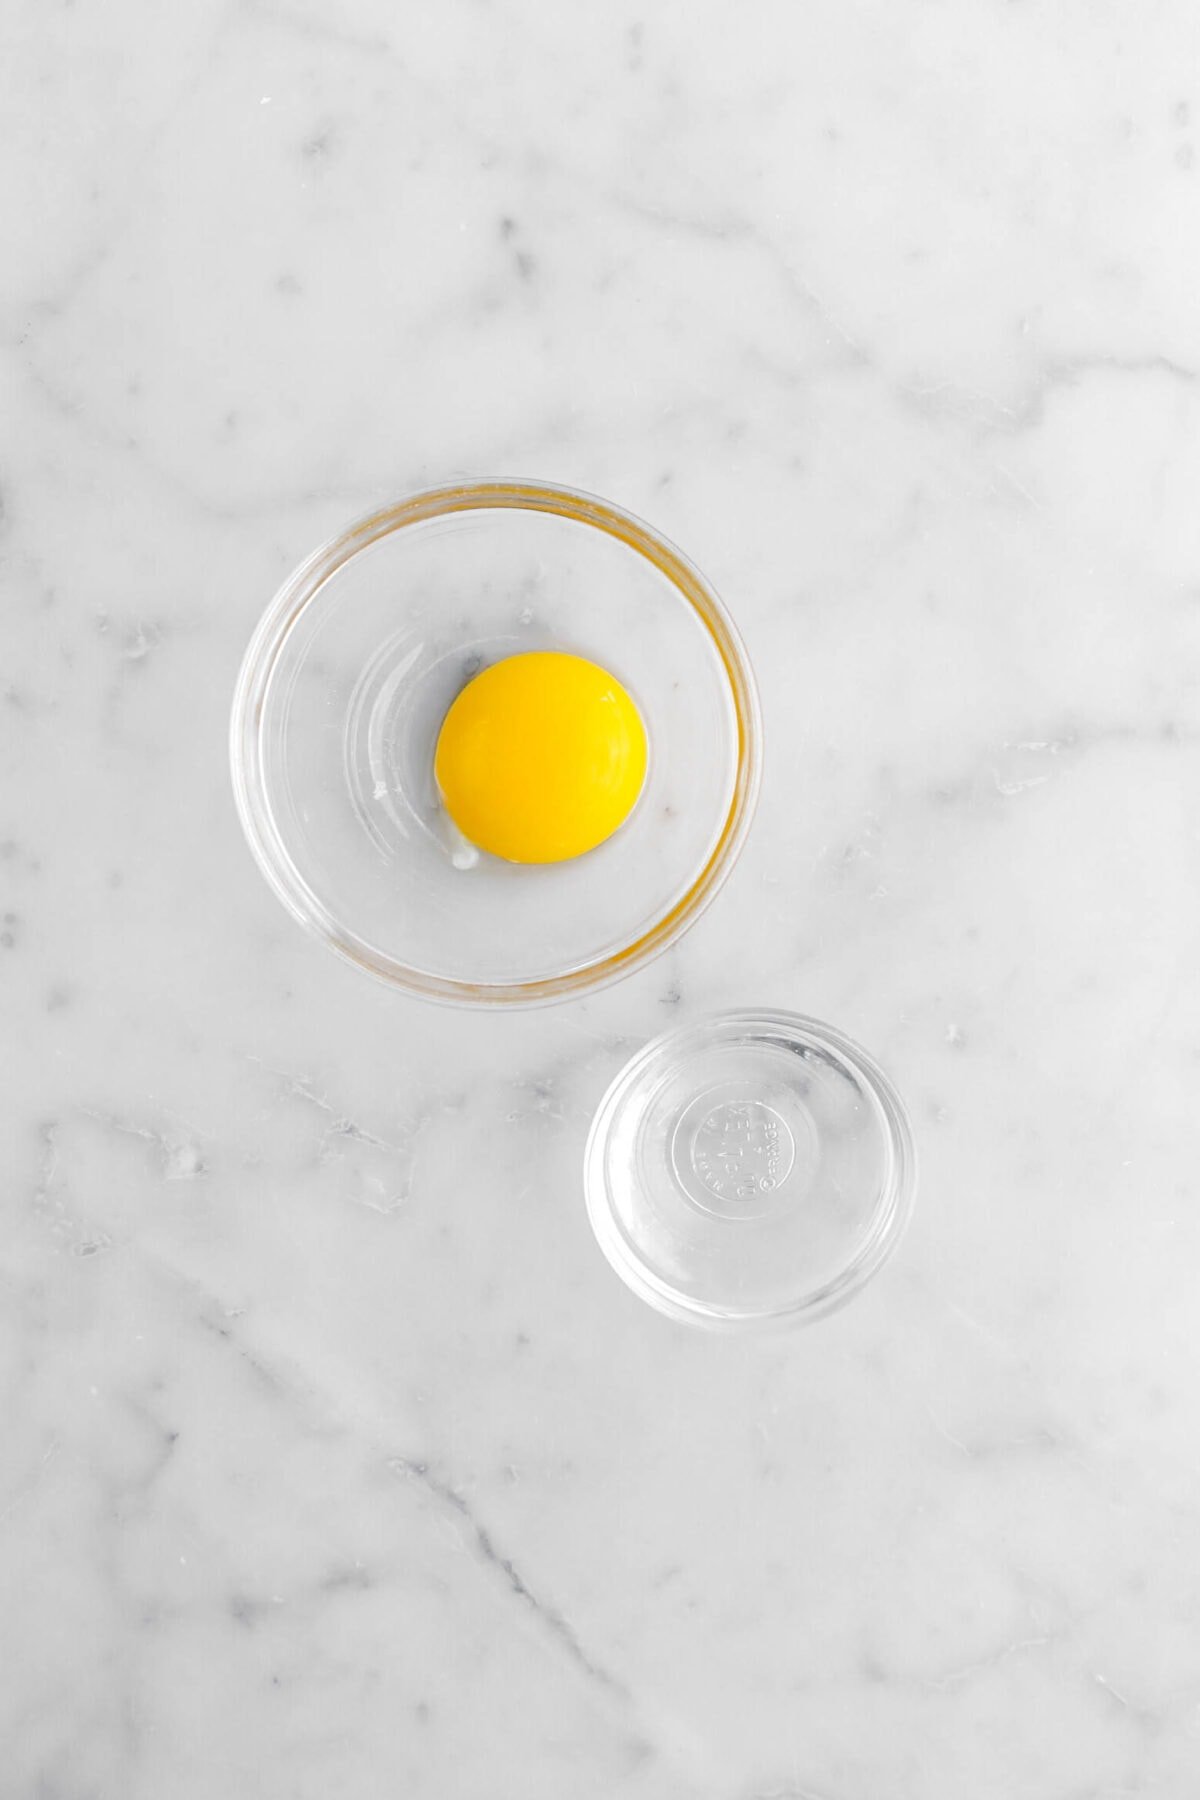 egg yolk and water in separate bowls on marble surface.